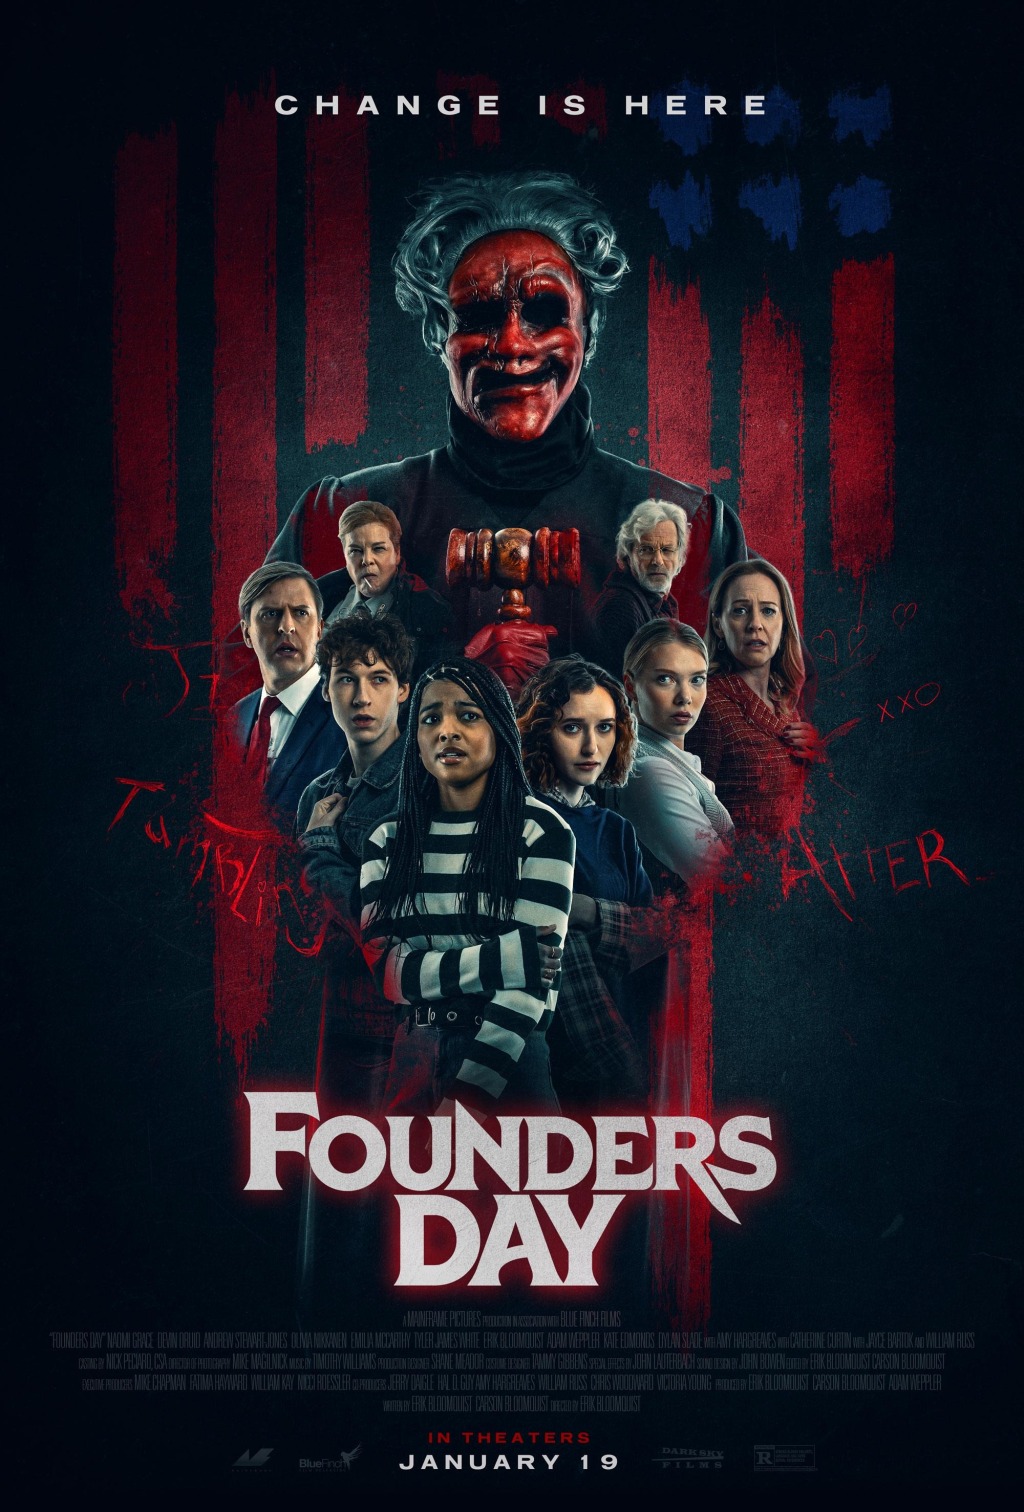 Founders Day Review — An entertaining slasher that delivers on its main promise